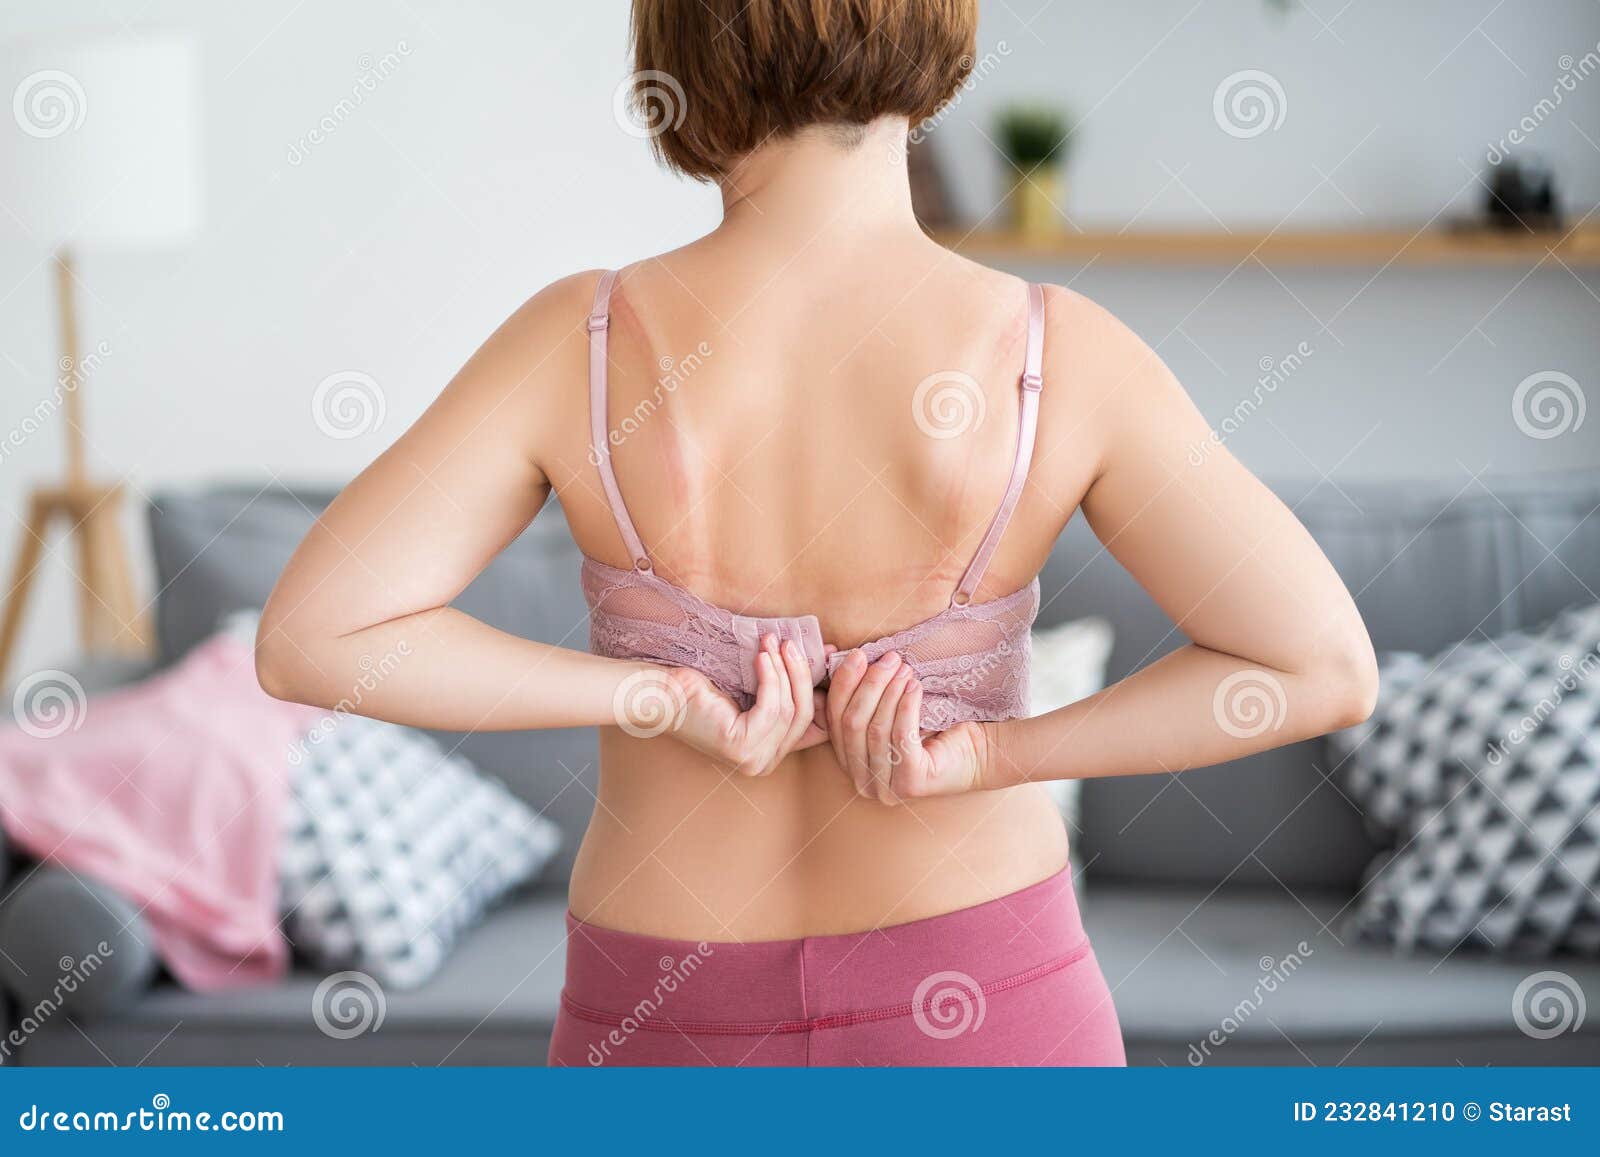 Woman Undressing and Unhooking Her Bra Stock Photo - Image of back, beauty:  232841210